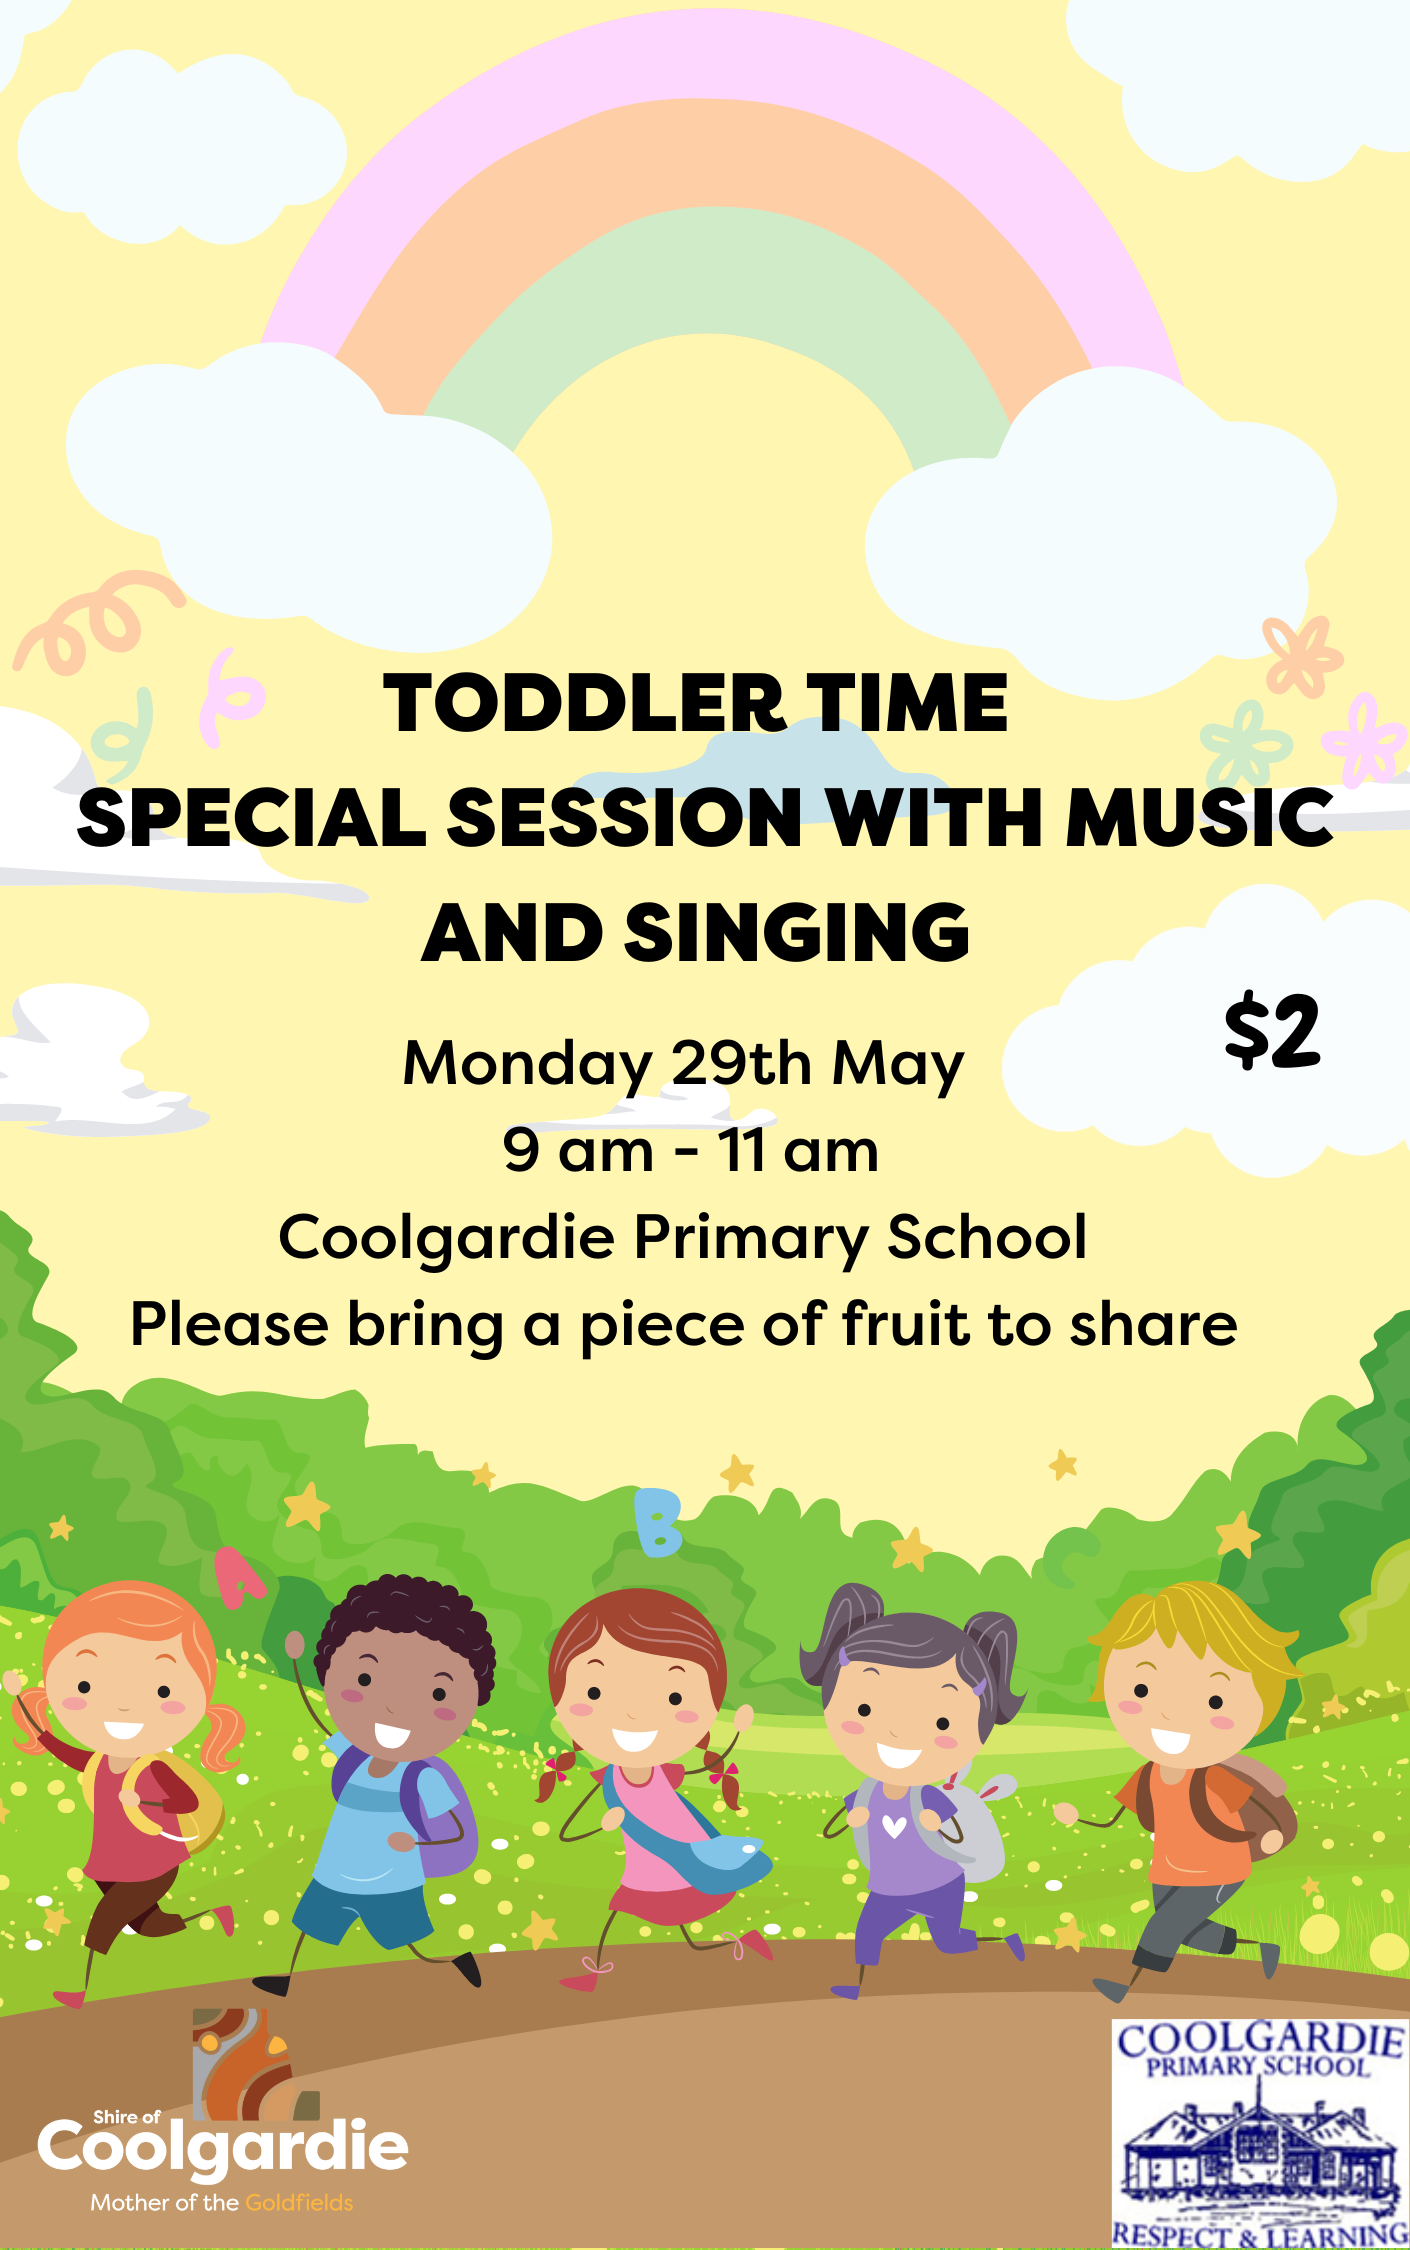 Toddler Time - Special Session with Music and Singing